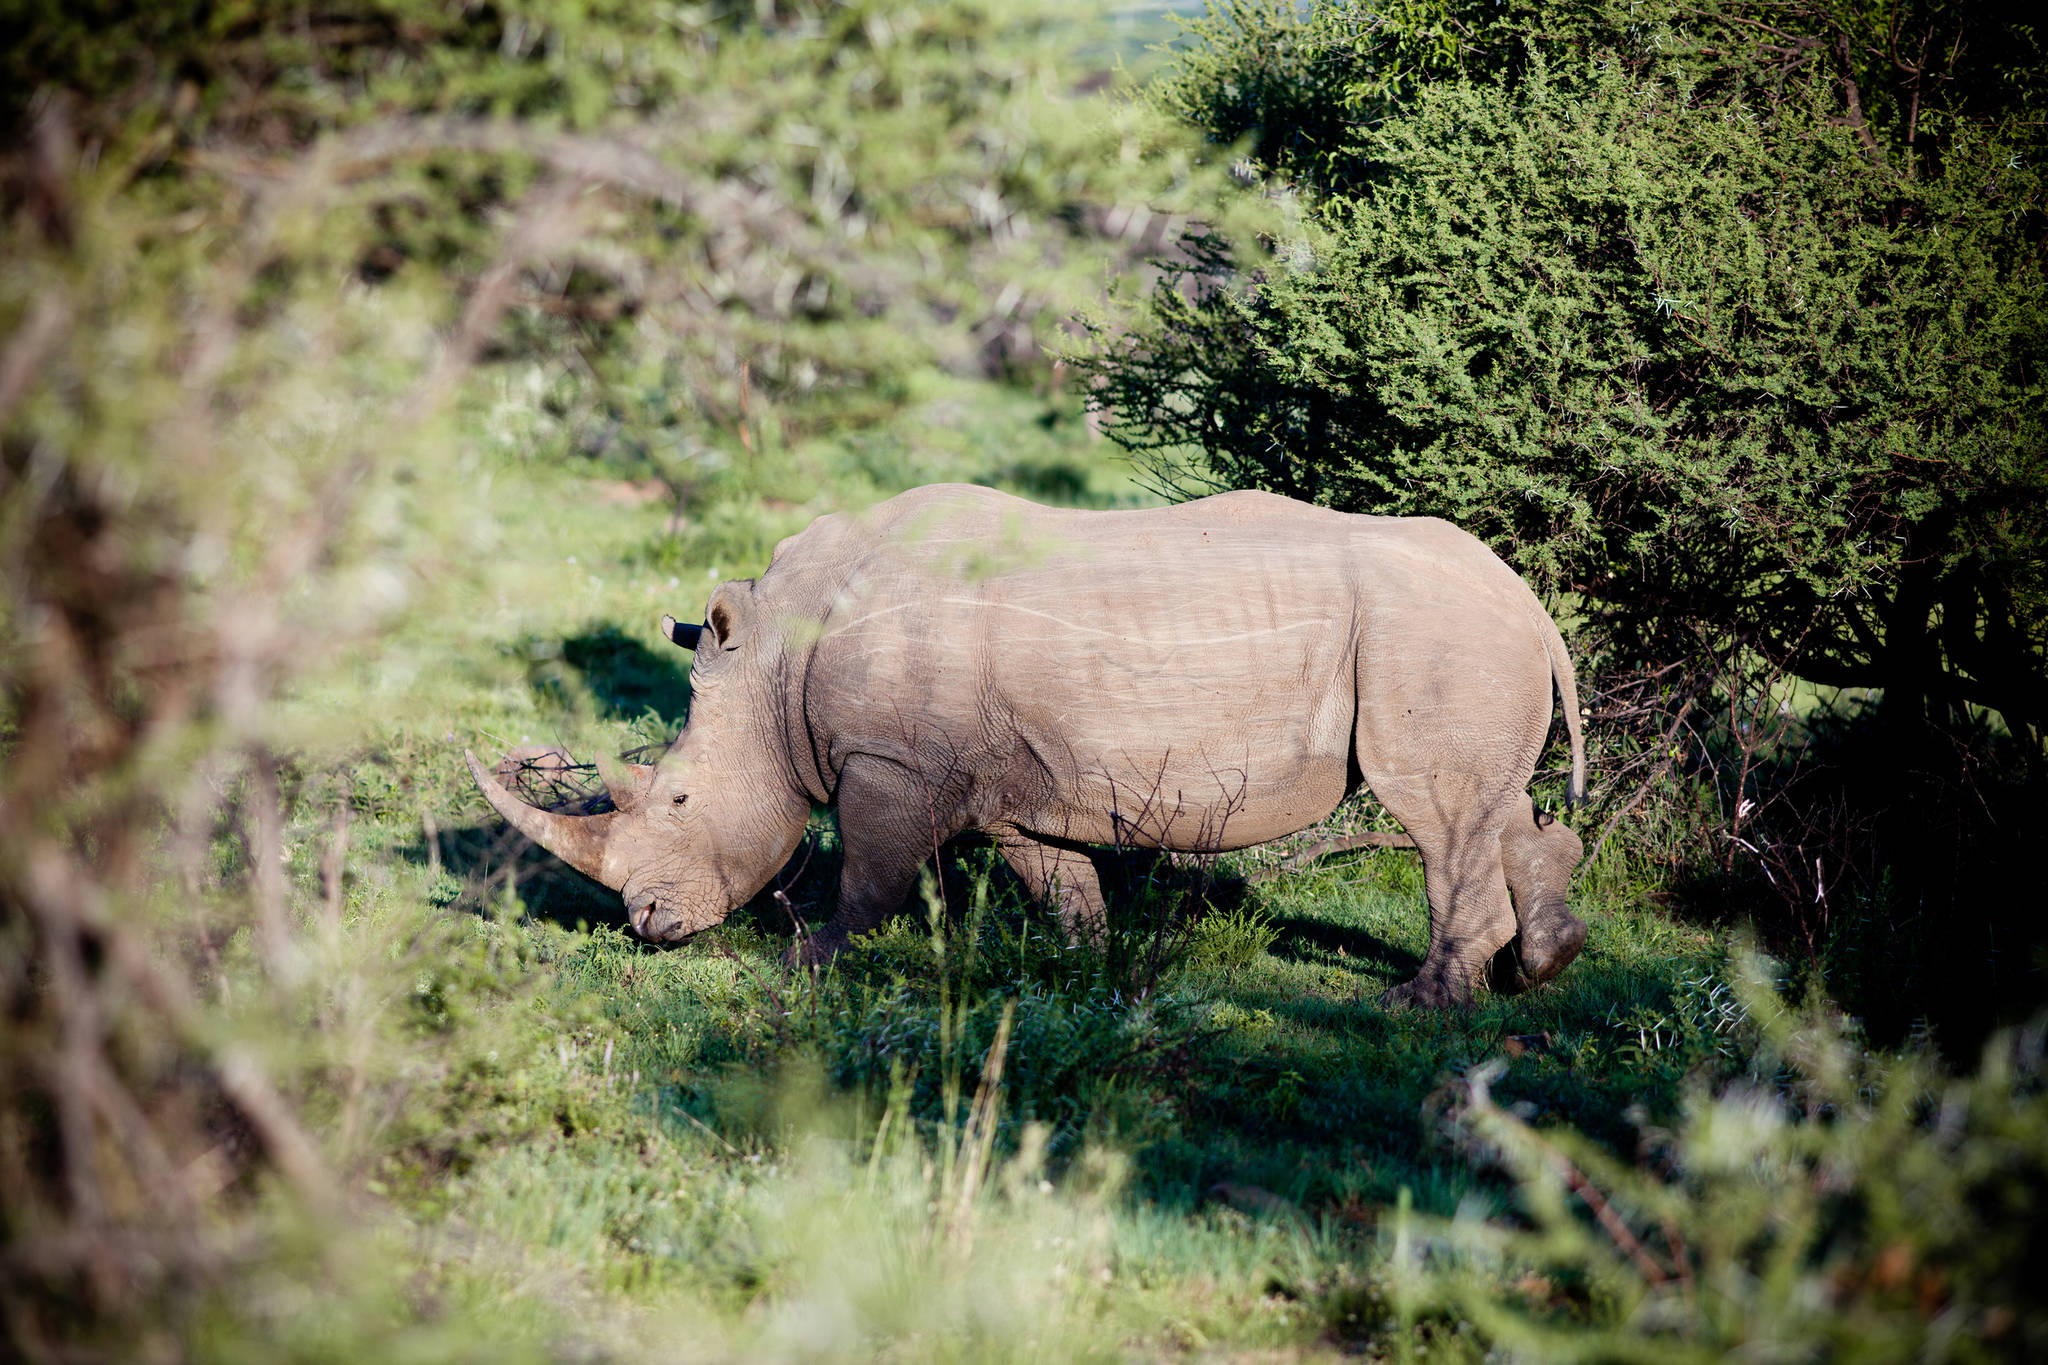 Dreamstime/TNS 
Researchers are working on a pilot program to inject rhino horns with radioactive material, a tactic that could discourage consumption and make it easier to detect illegal trade.